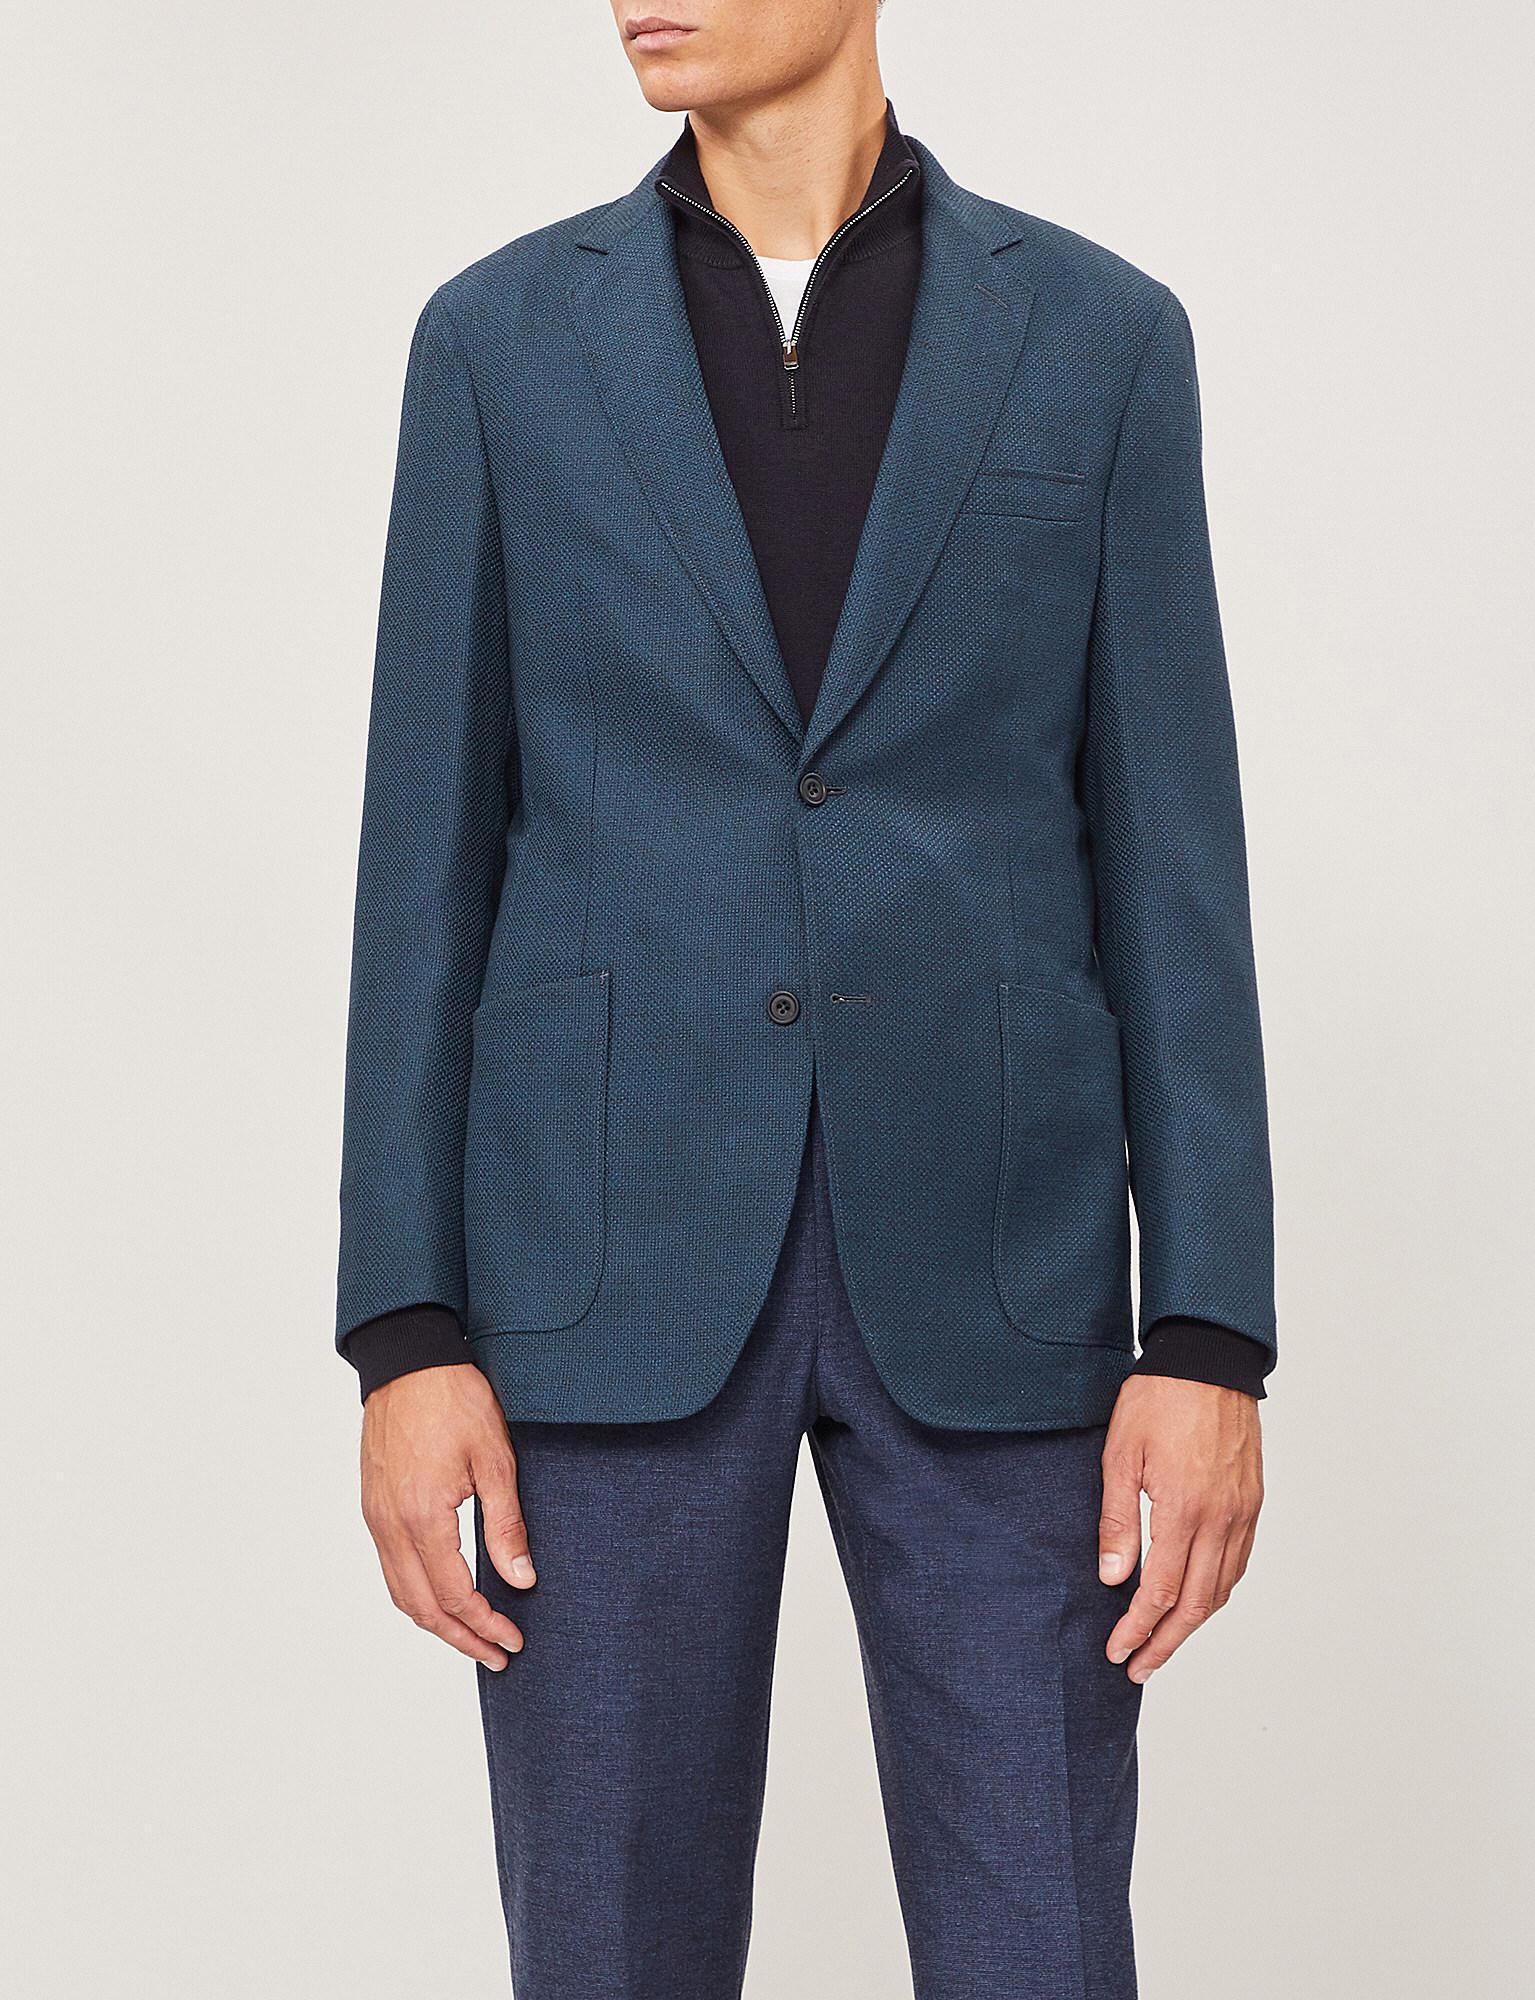 Richard James Single-breasted Tailored-fit Wool Jacket in Teal (Blue ...